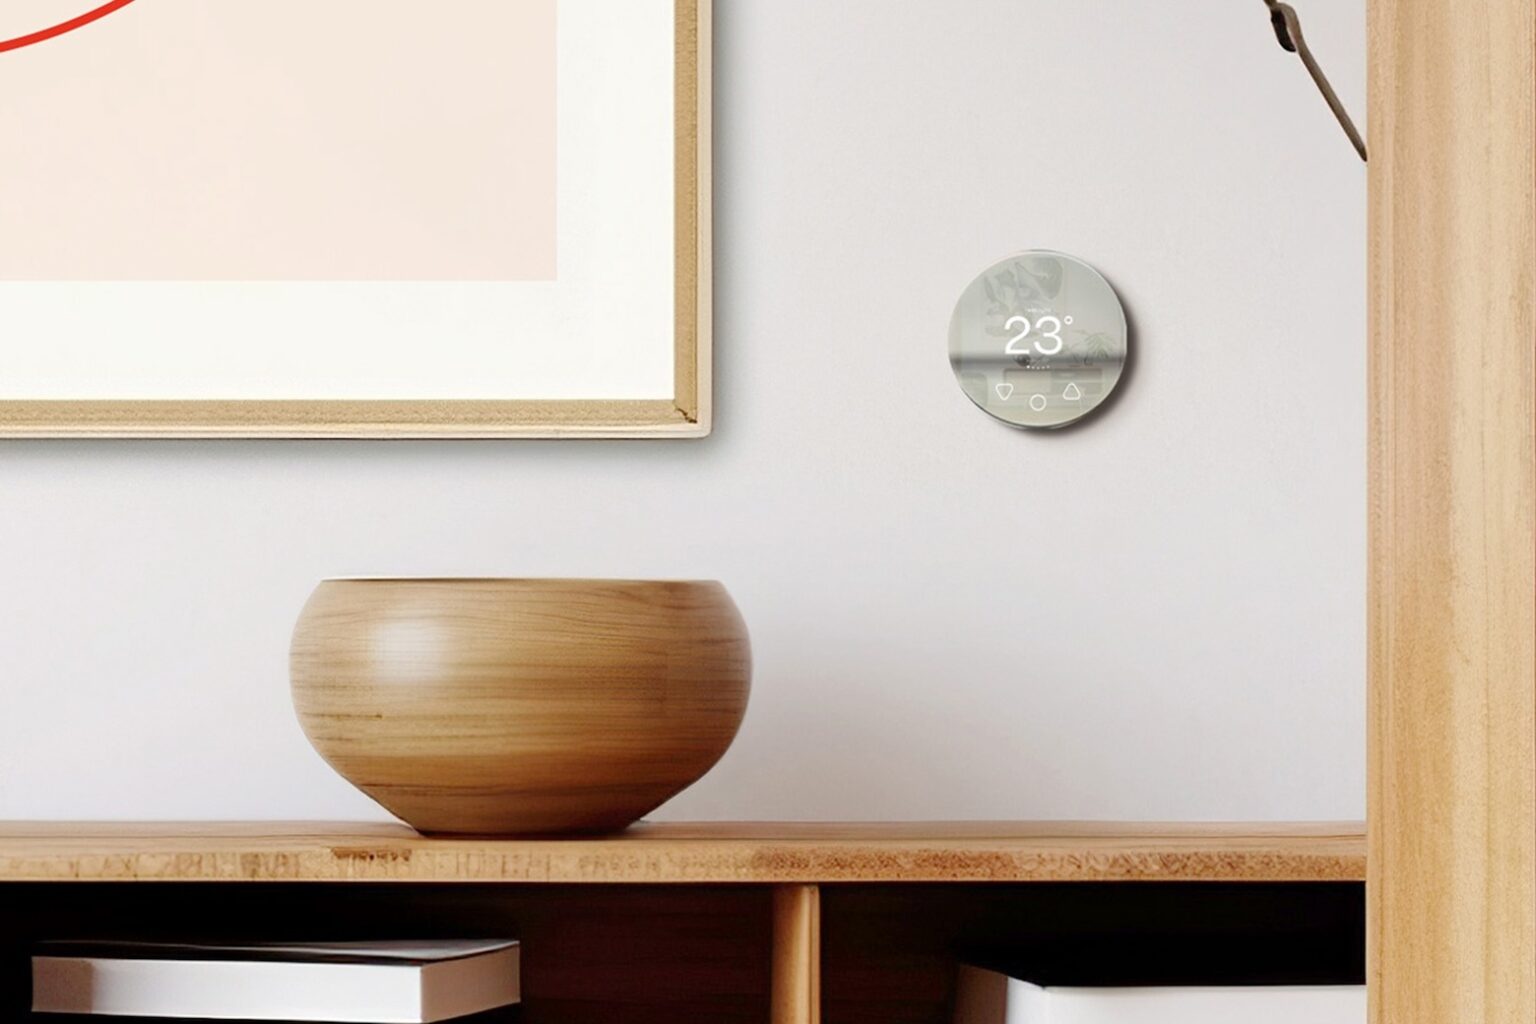 Keep cool this summer with this smart thermostat, now only $134.99.